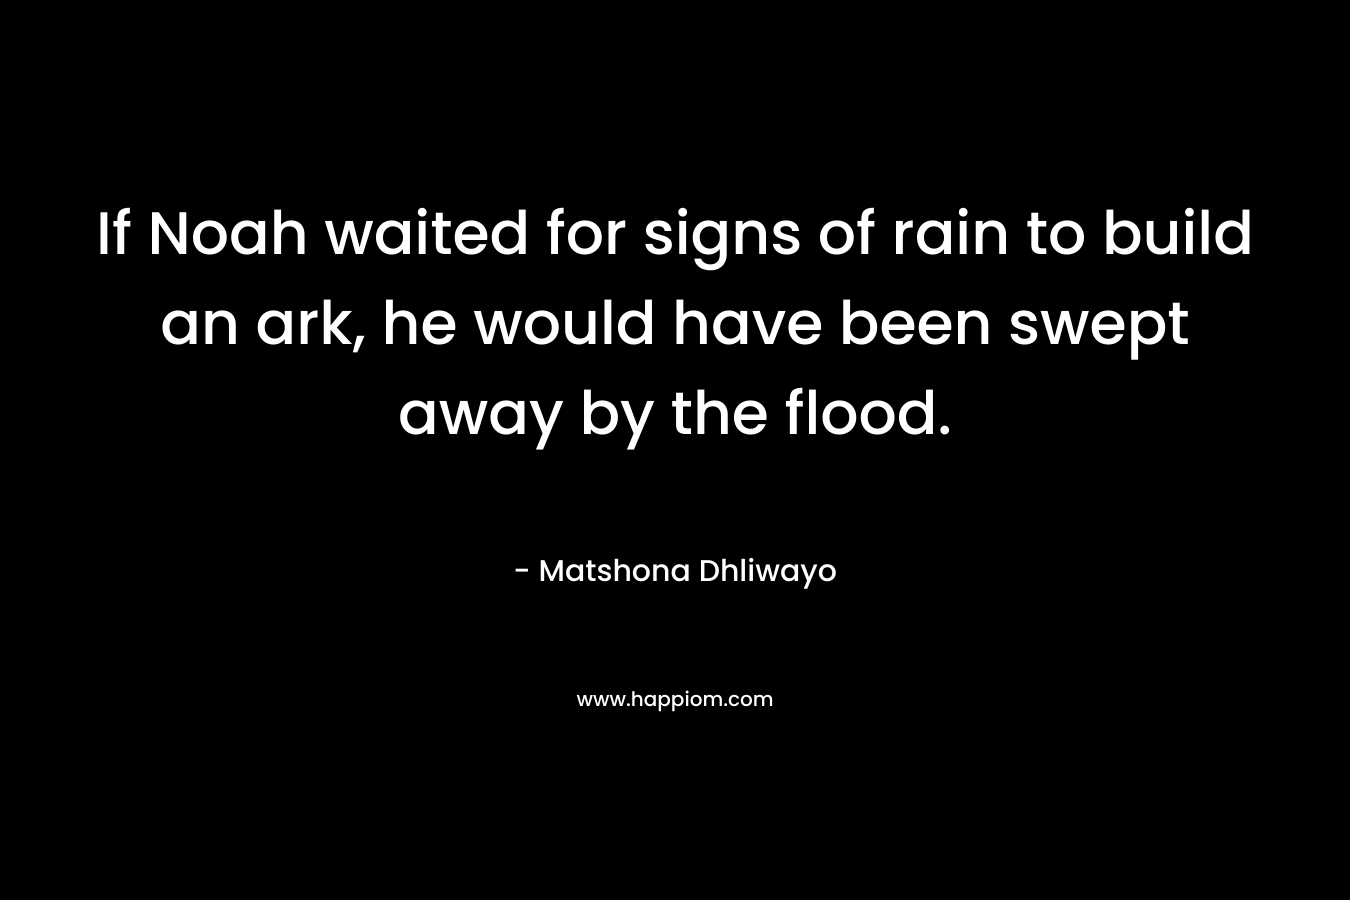 If Noah waited for signs of rain to build an ark, he would have been swept away by the flood. – Matshona Dhliwayo